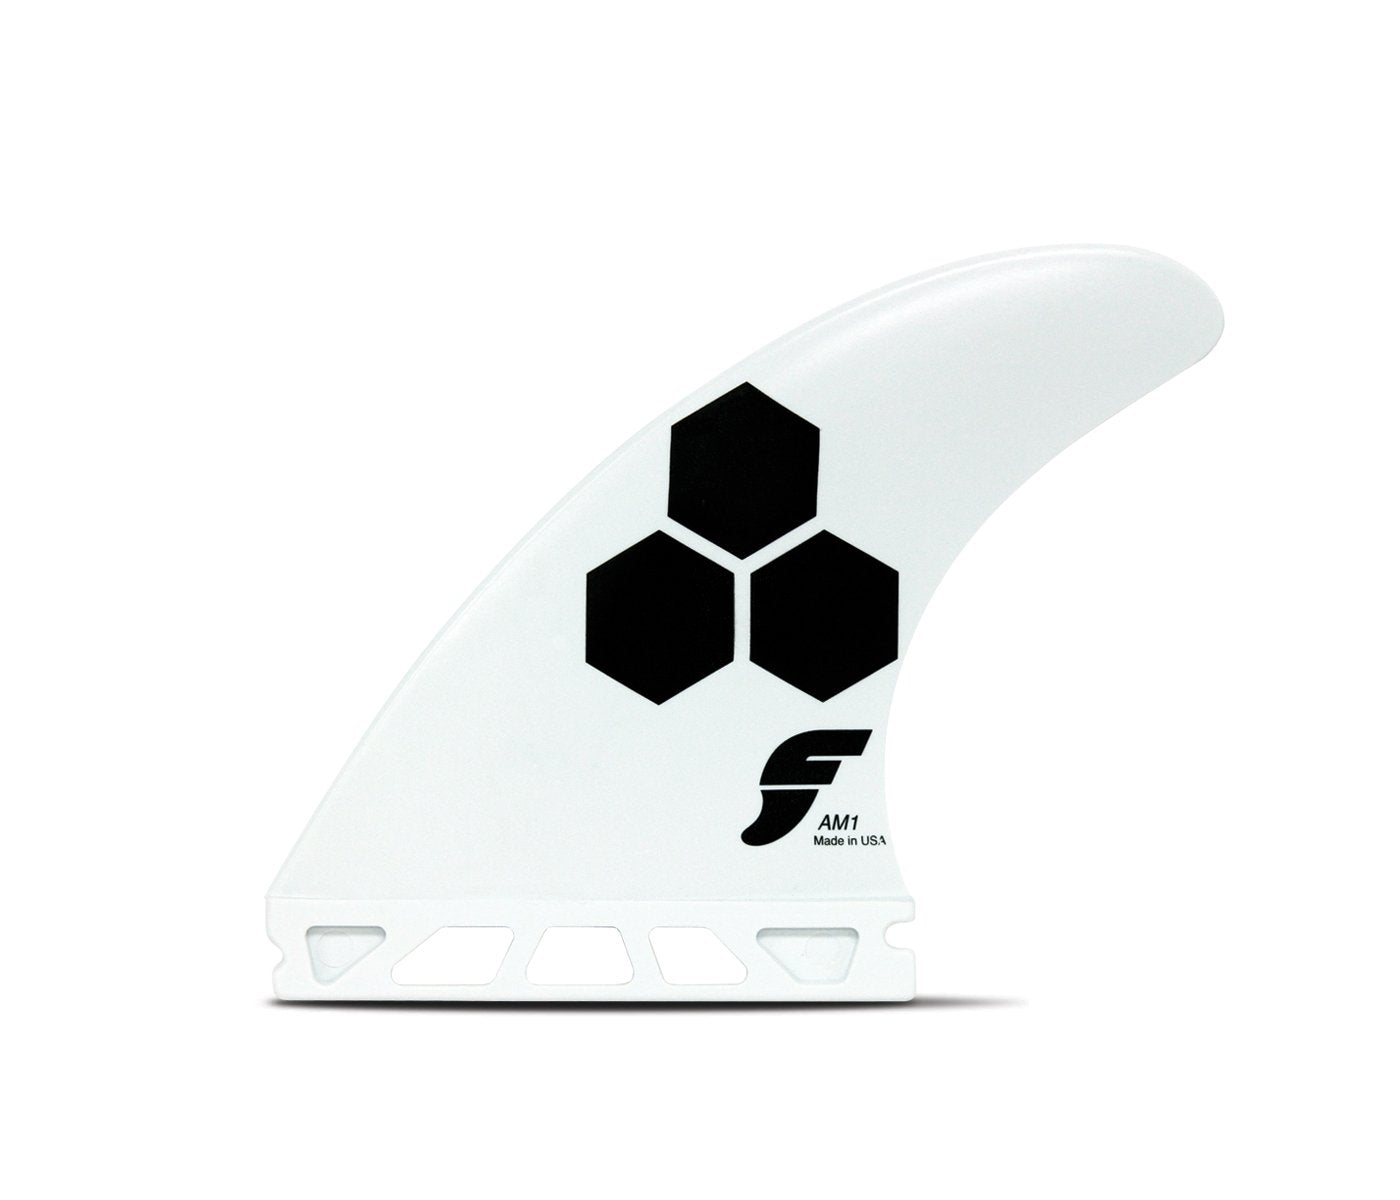 Thermotech AM1, All Sizes, Thruster Surfboard Fins